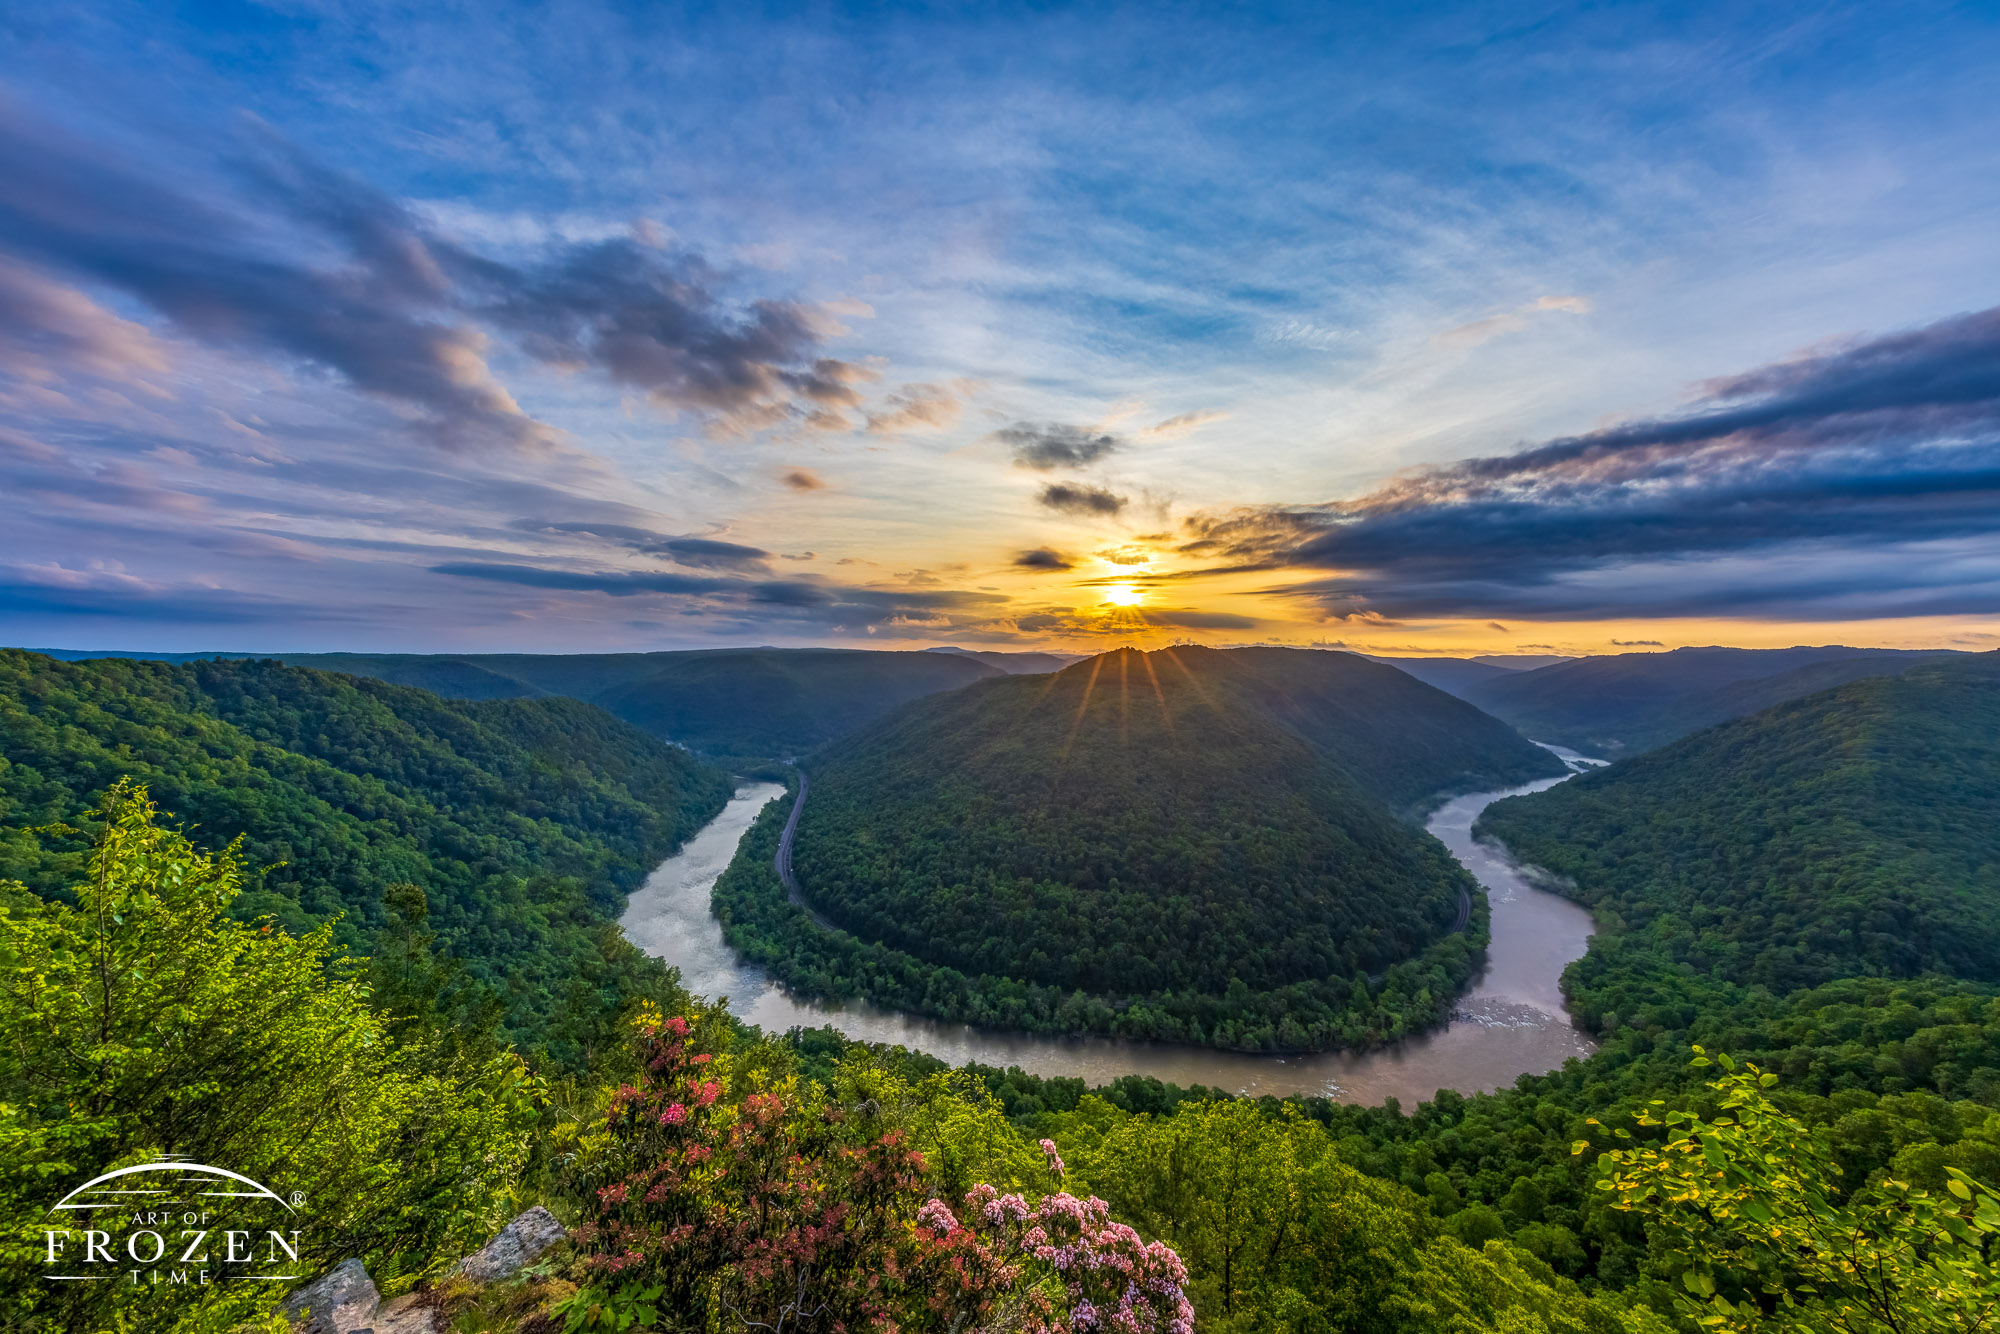 A horse-shoe bend as the New River meanders through West Virginia's sandstone and shale formations as dawn breaks over New River Gorge National Park